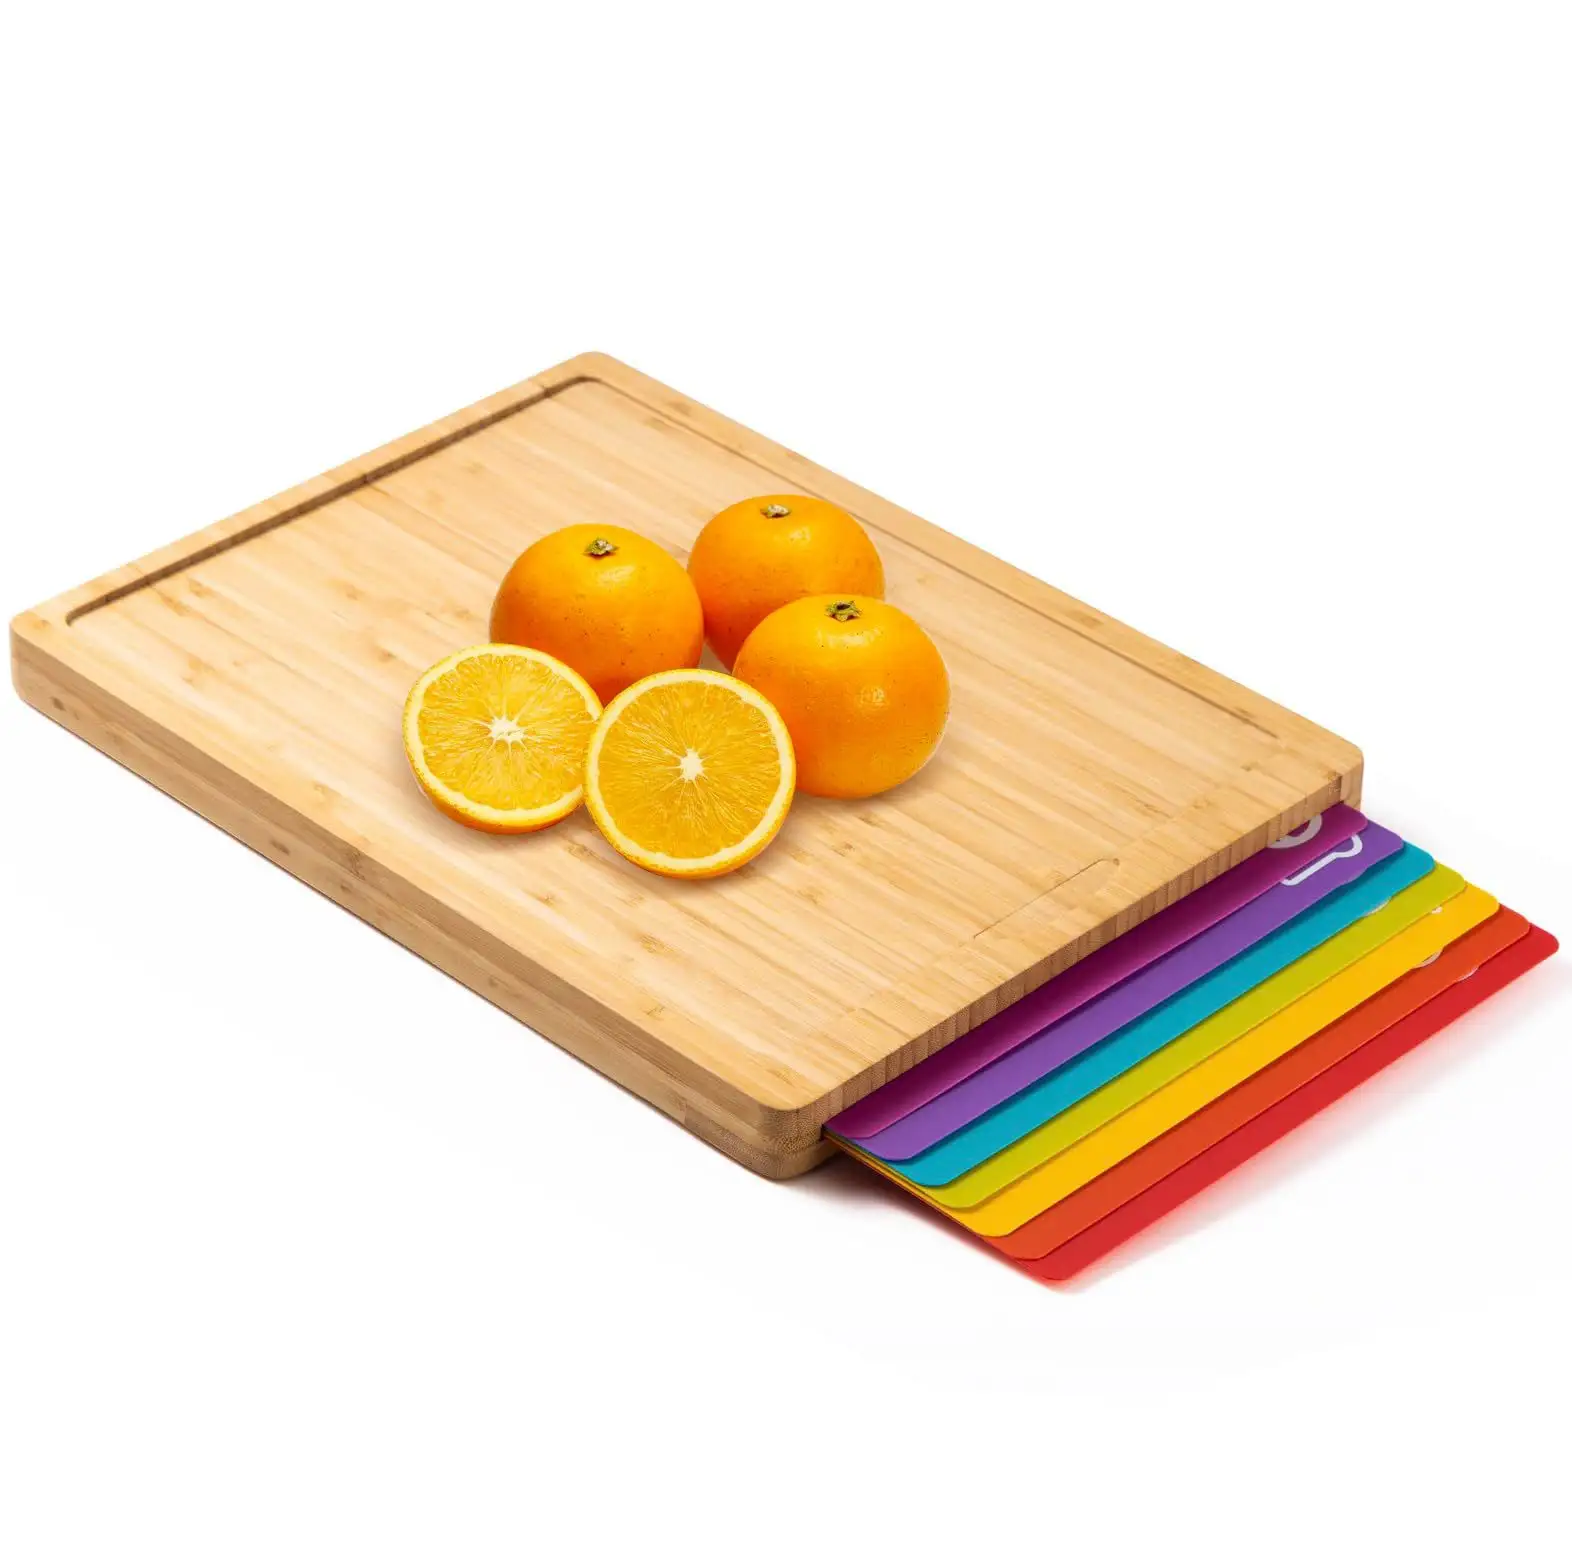 Bamboo Wooden Cutting Board Set with Food Flexible Icons Kitchen Cleaning Products